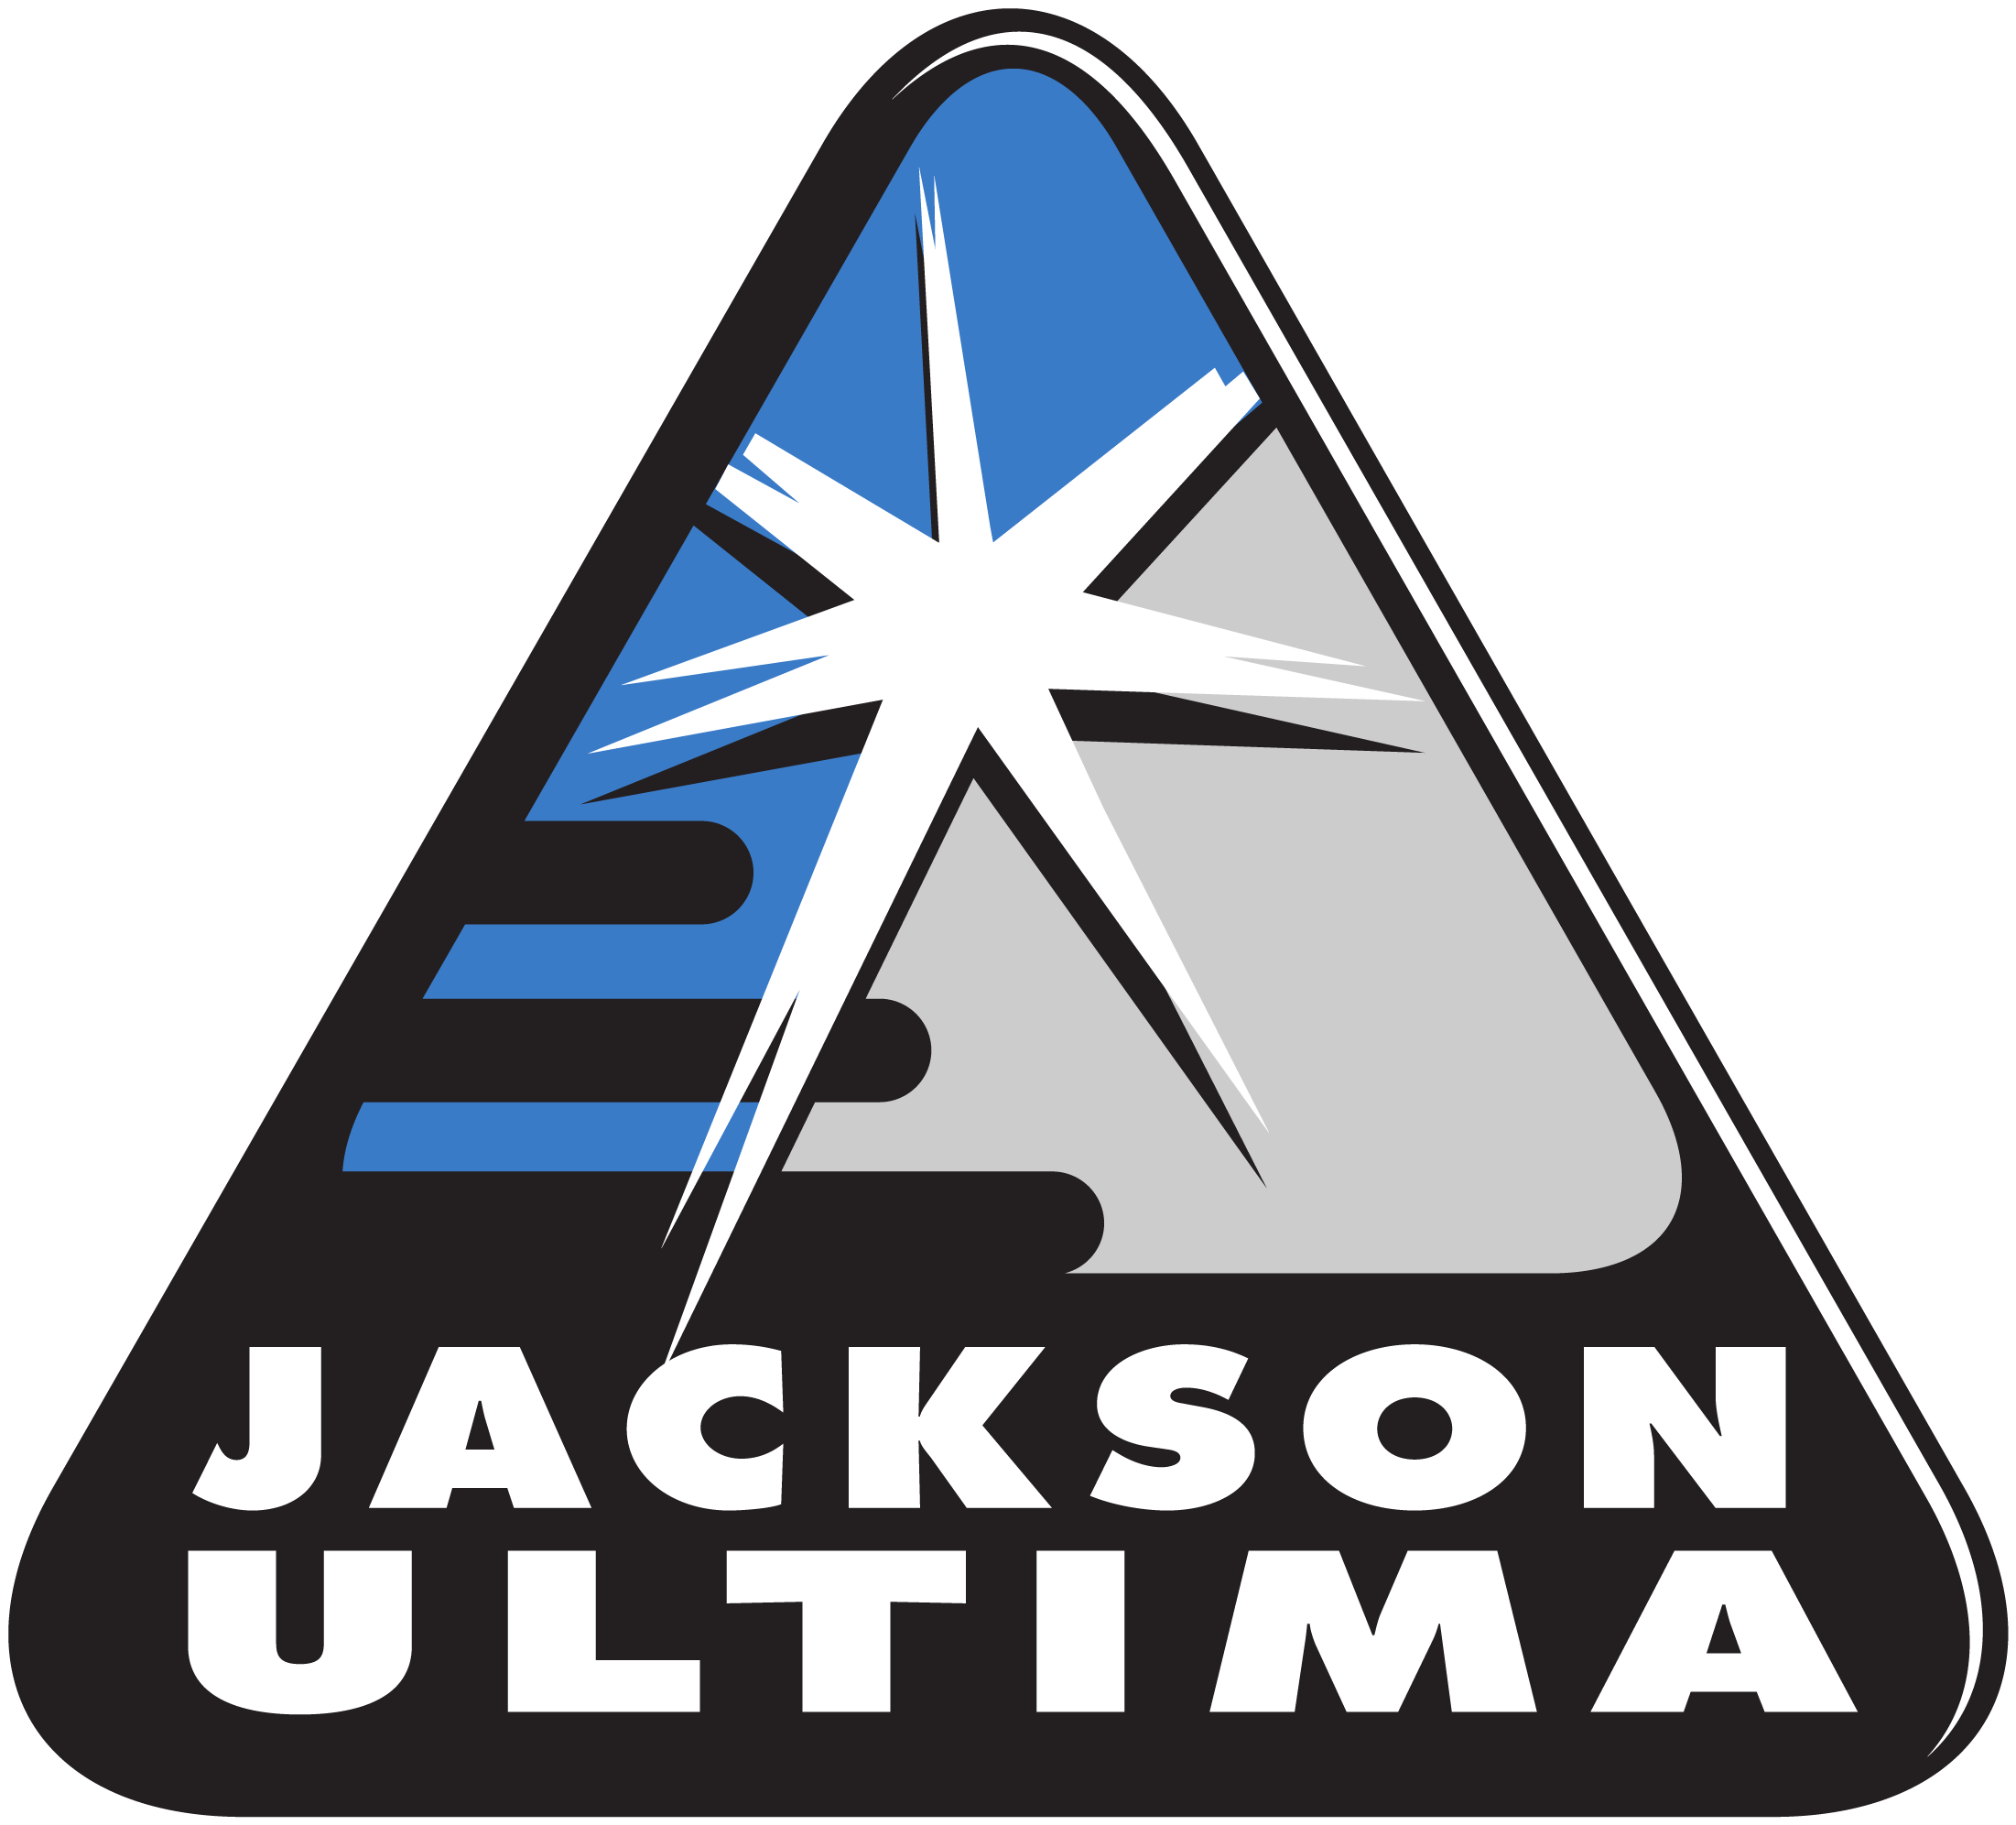 JACKSON ULTIMA logo.png__PID:8887a0be-0771-4336-a5fd-bf4f673e0094